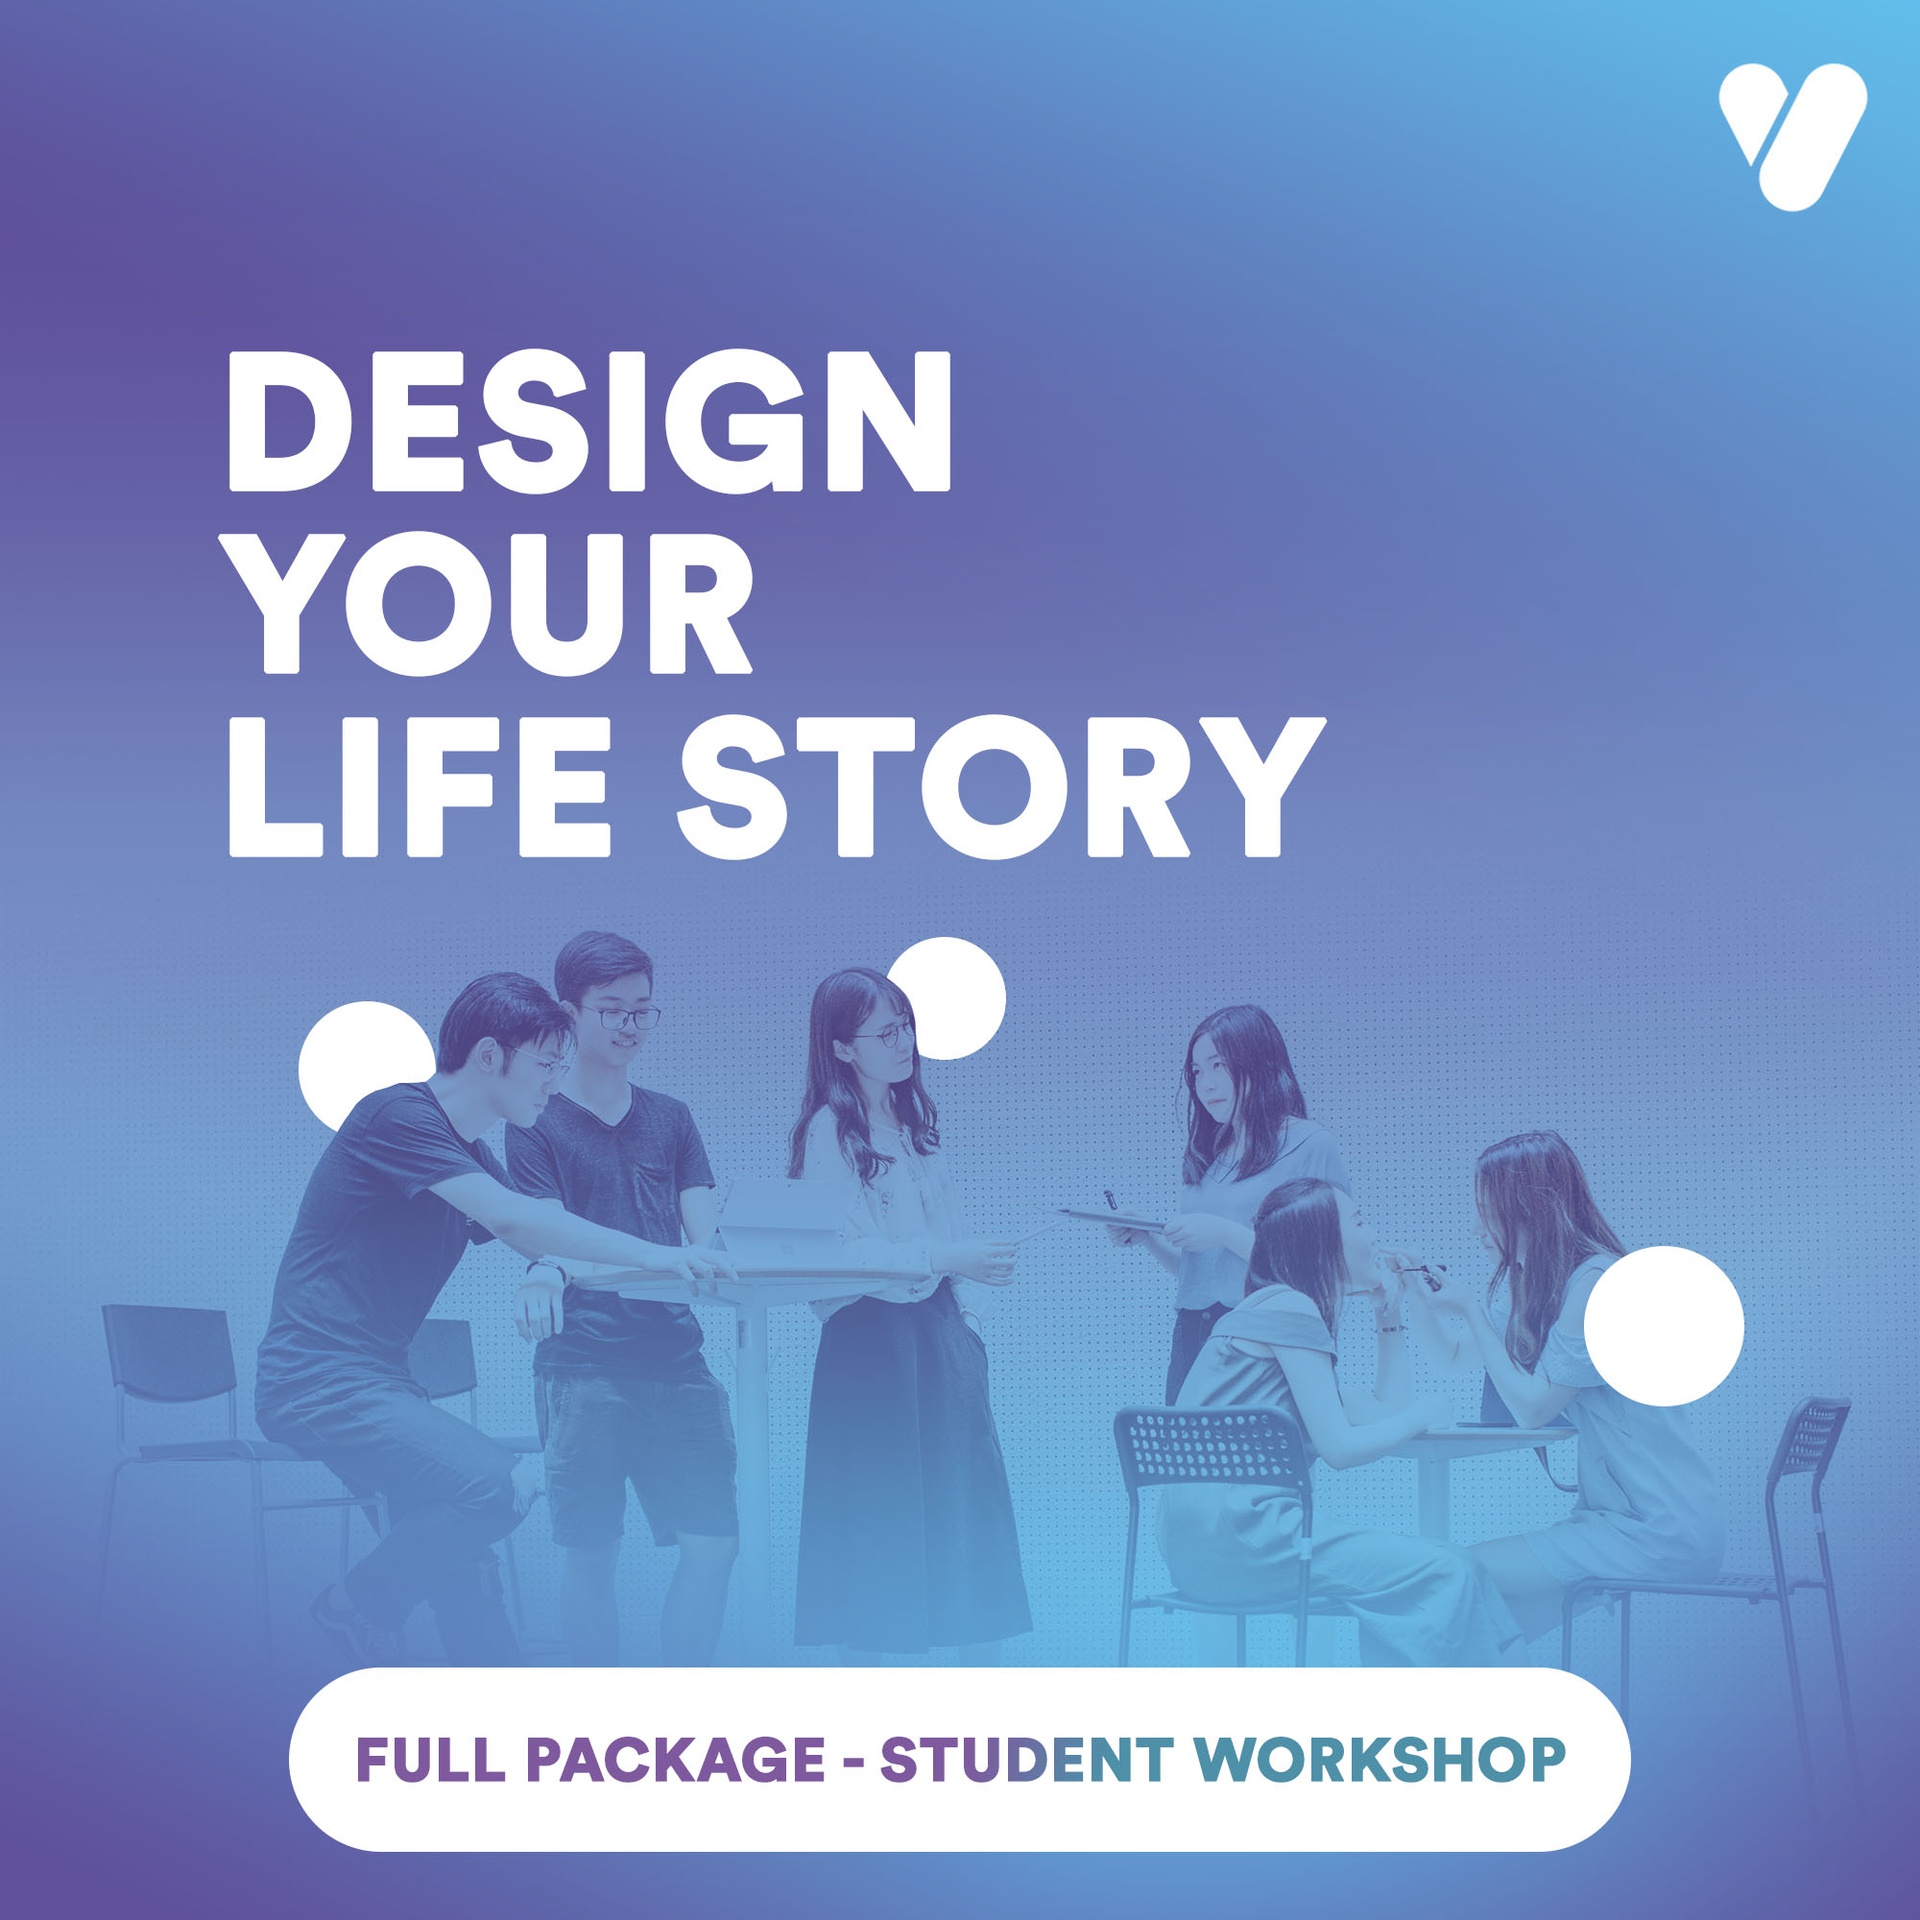 Design Your Life Story: How to Be Successful 101